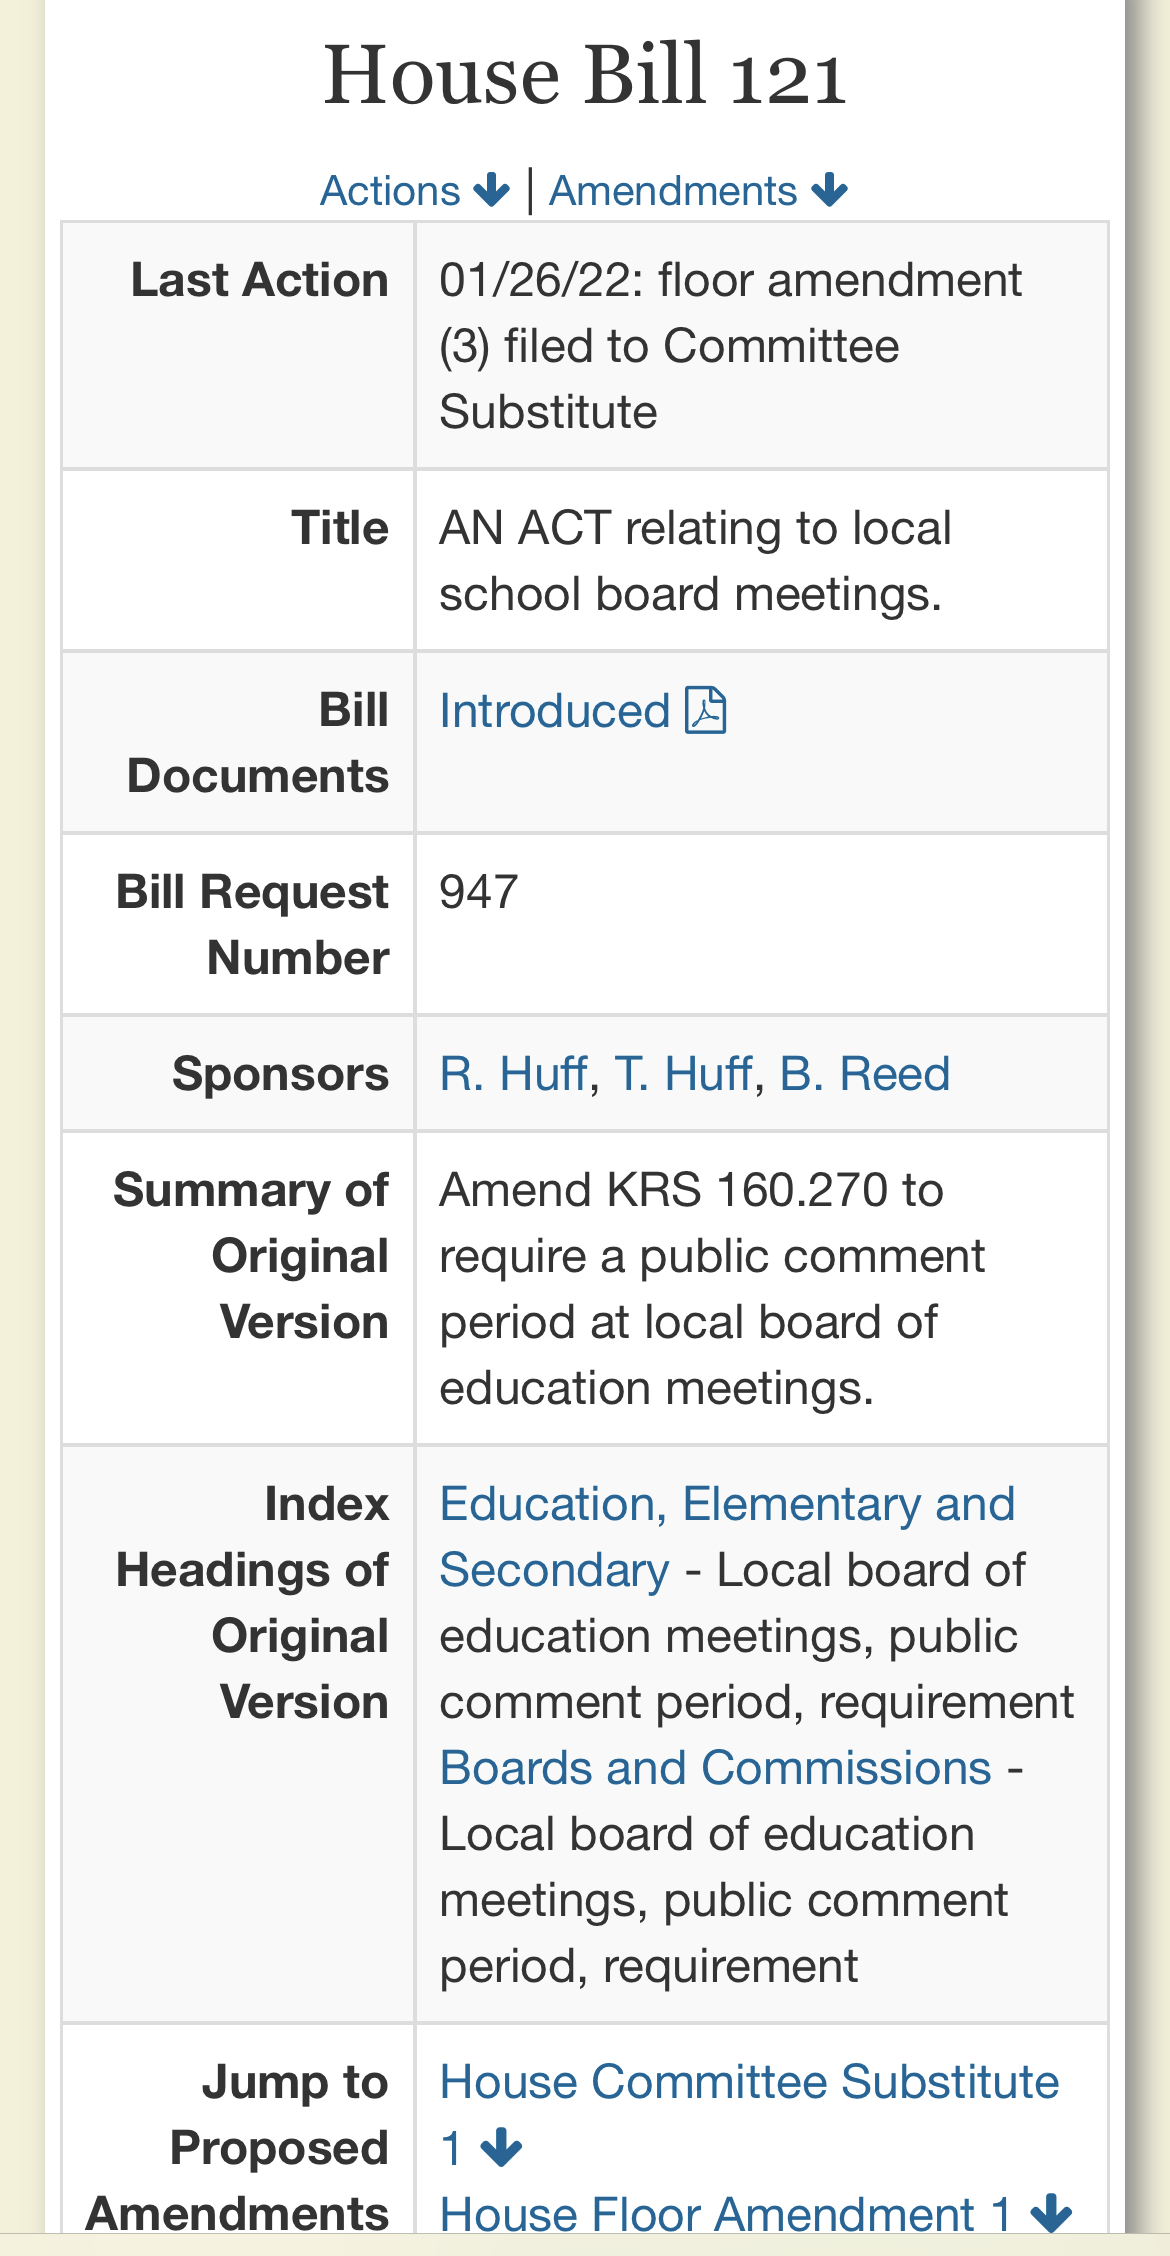 A summary of HB 121 from the LRC website